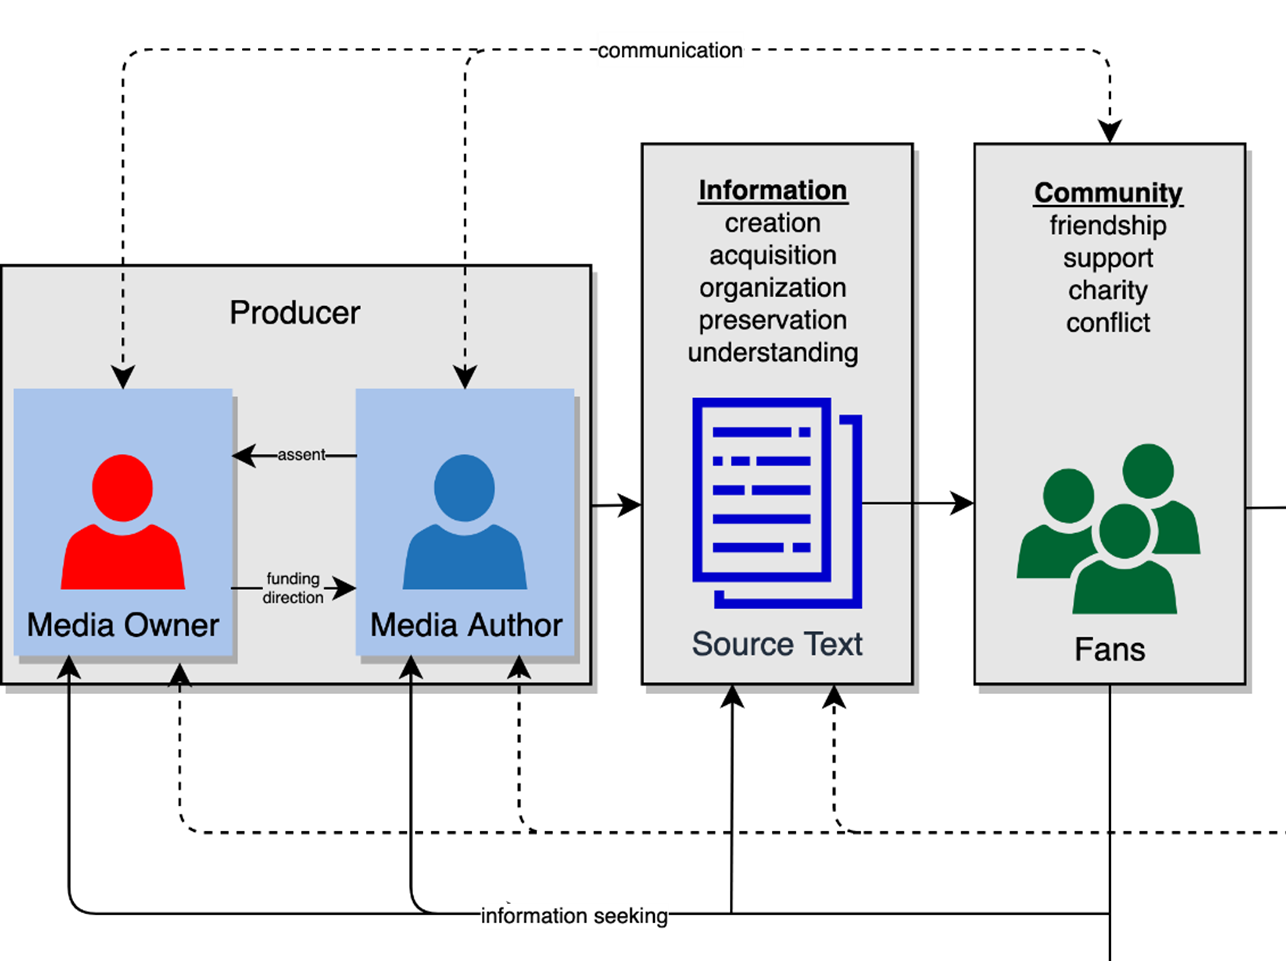 A diagram showing the complex flow of ownership, media content, and information between media owners, media creators, and fans.